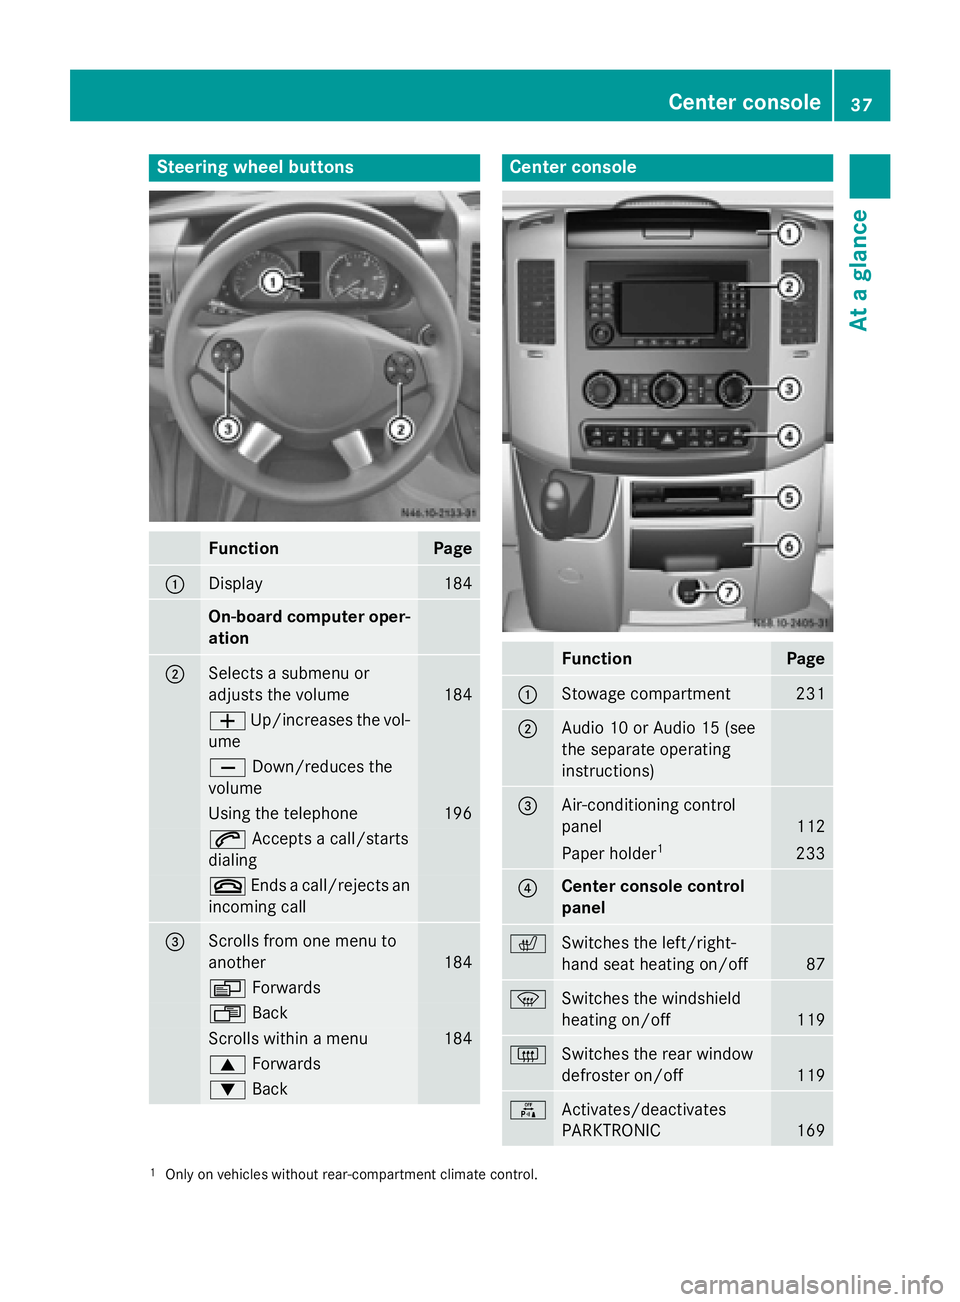 MERCEDES-BENZ SPRINTER 2015  MY15 Operator’s Manual Steering wheel buttons
Function Page
0043
Display 184
On-board computer oper-
ation 0044
Selects a submenu or
adjusts the volume
184
0081
Up/increases the vol-
ume 0082
Down/reduces the
volume Using t